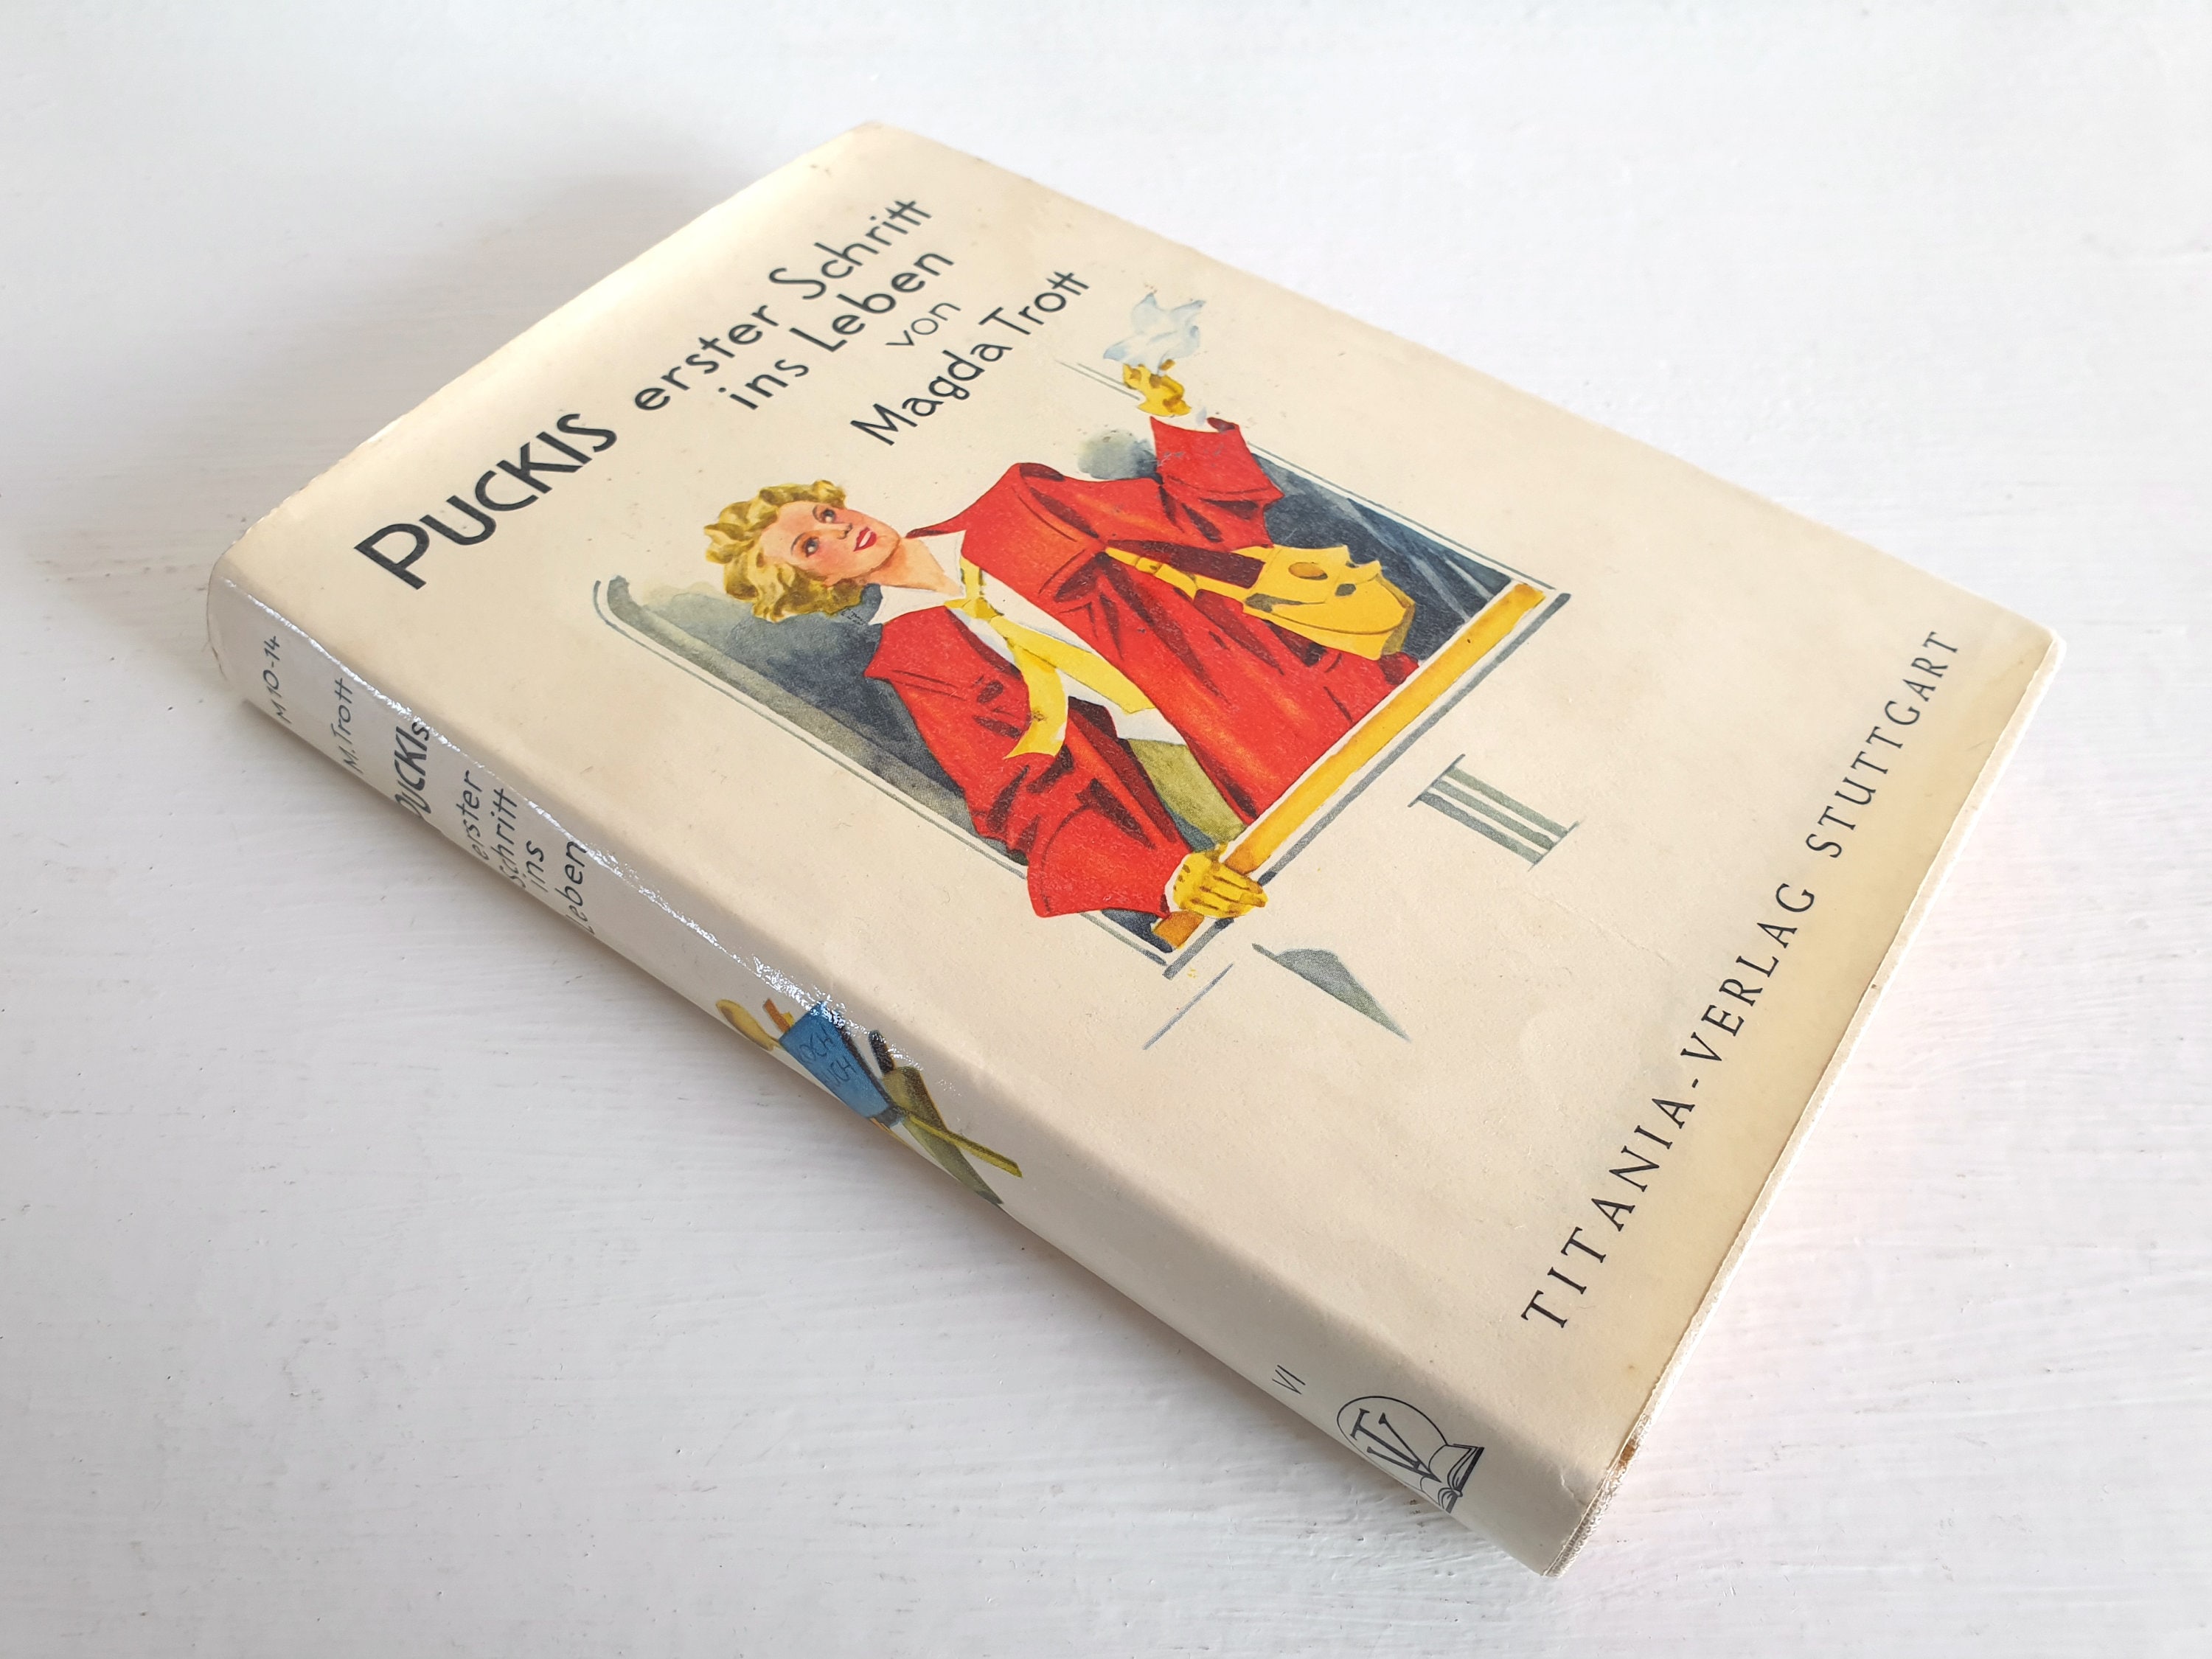 1x Pucki, Old Children's Book, Youth Book, Magda Trott, Collector's Item,  Vintage Book, Titania Verlag 